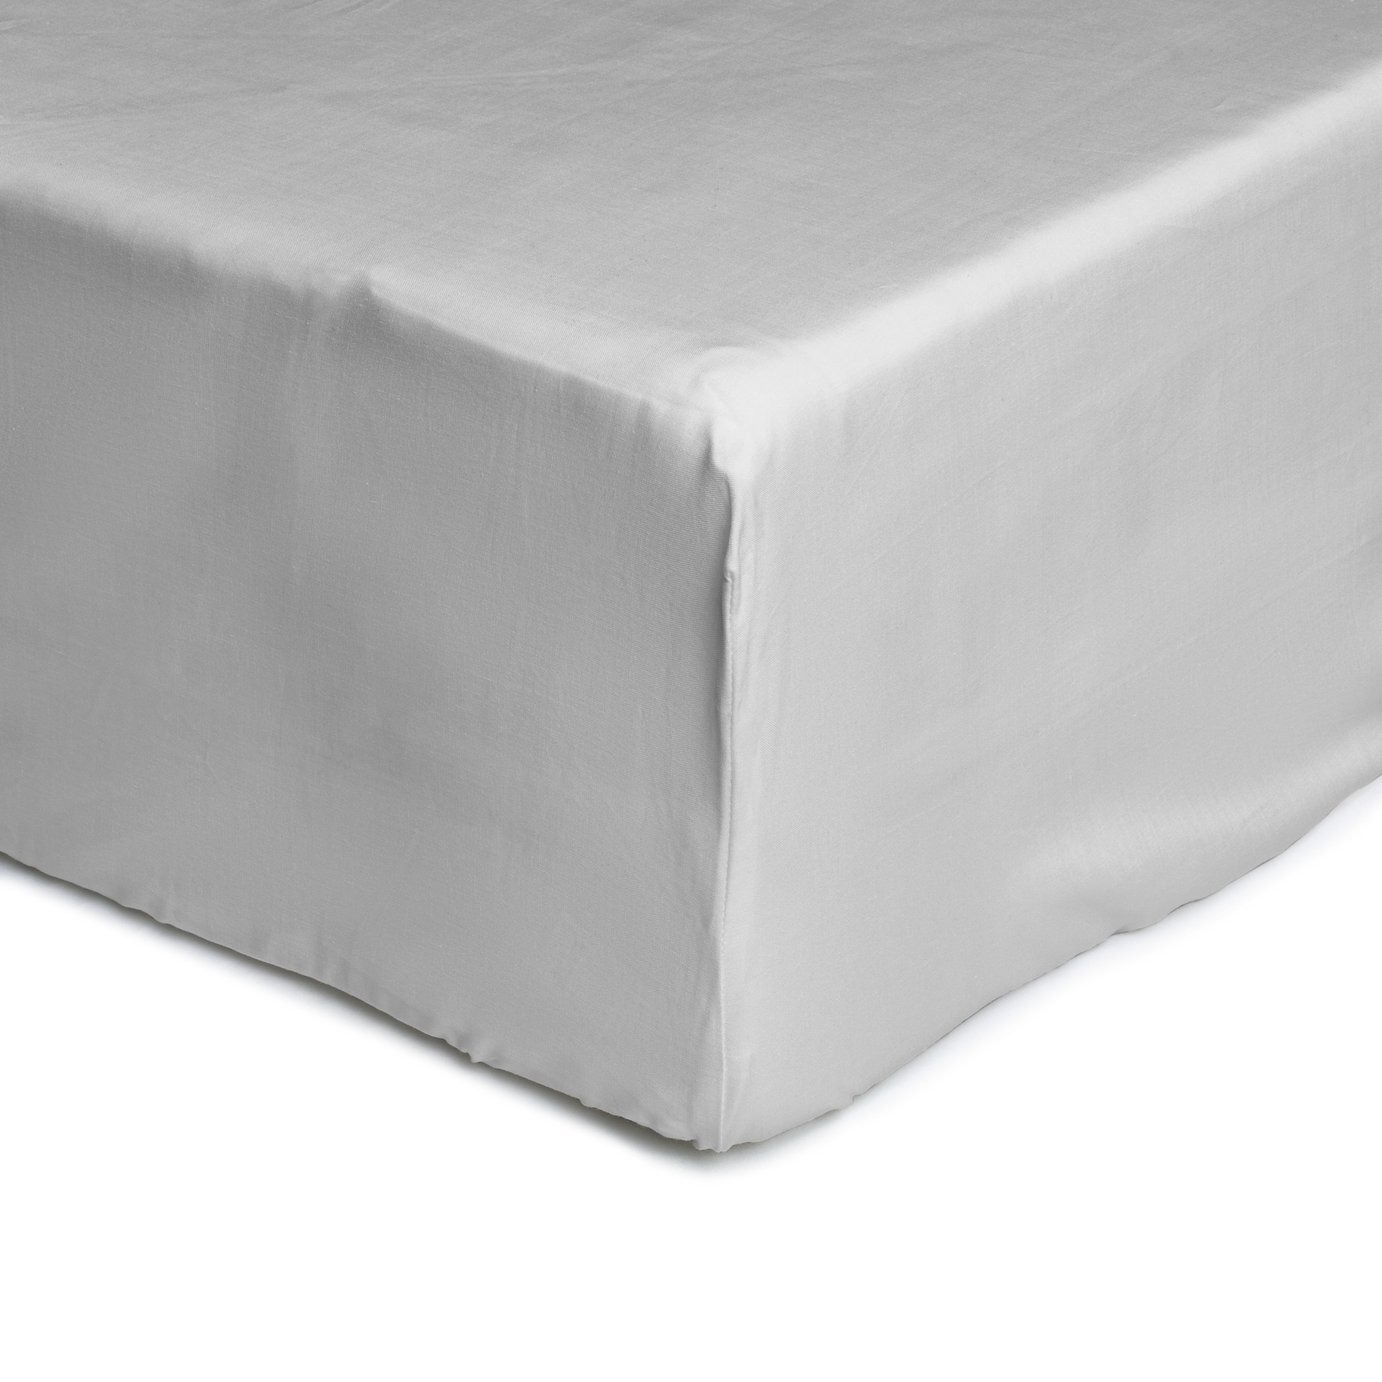 Habitat Anti-Microbial Cotton Dove Grey Fitted Sheet -Double - image 1